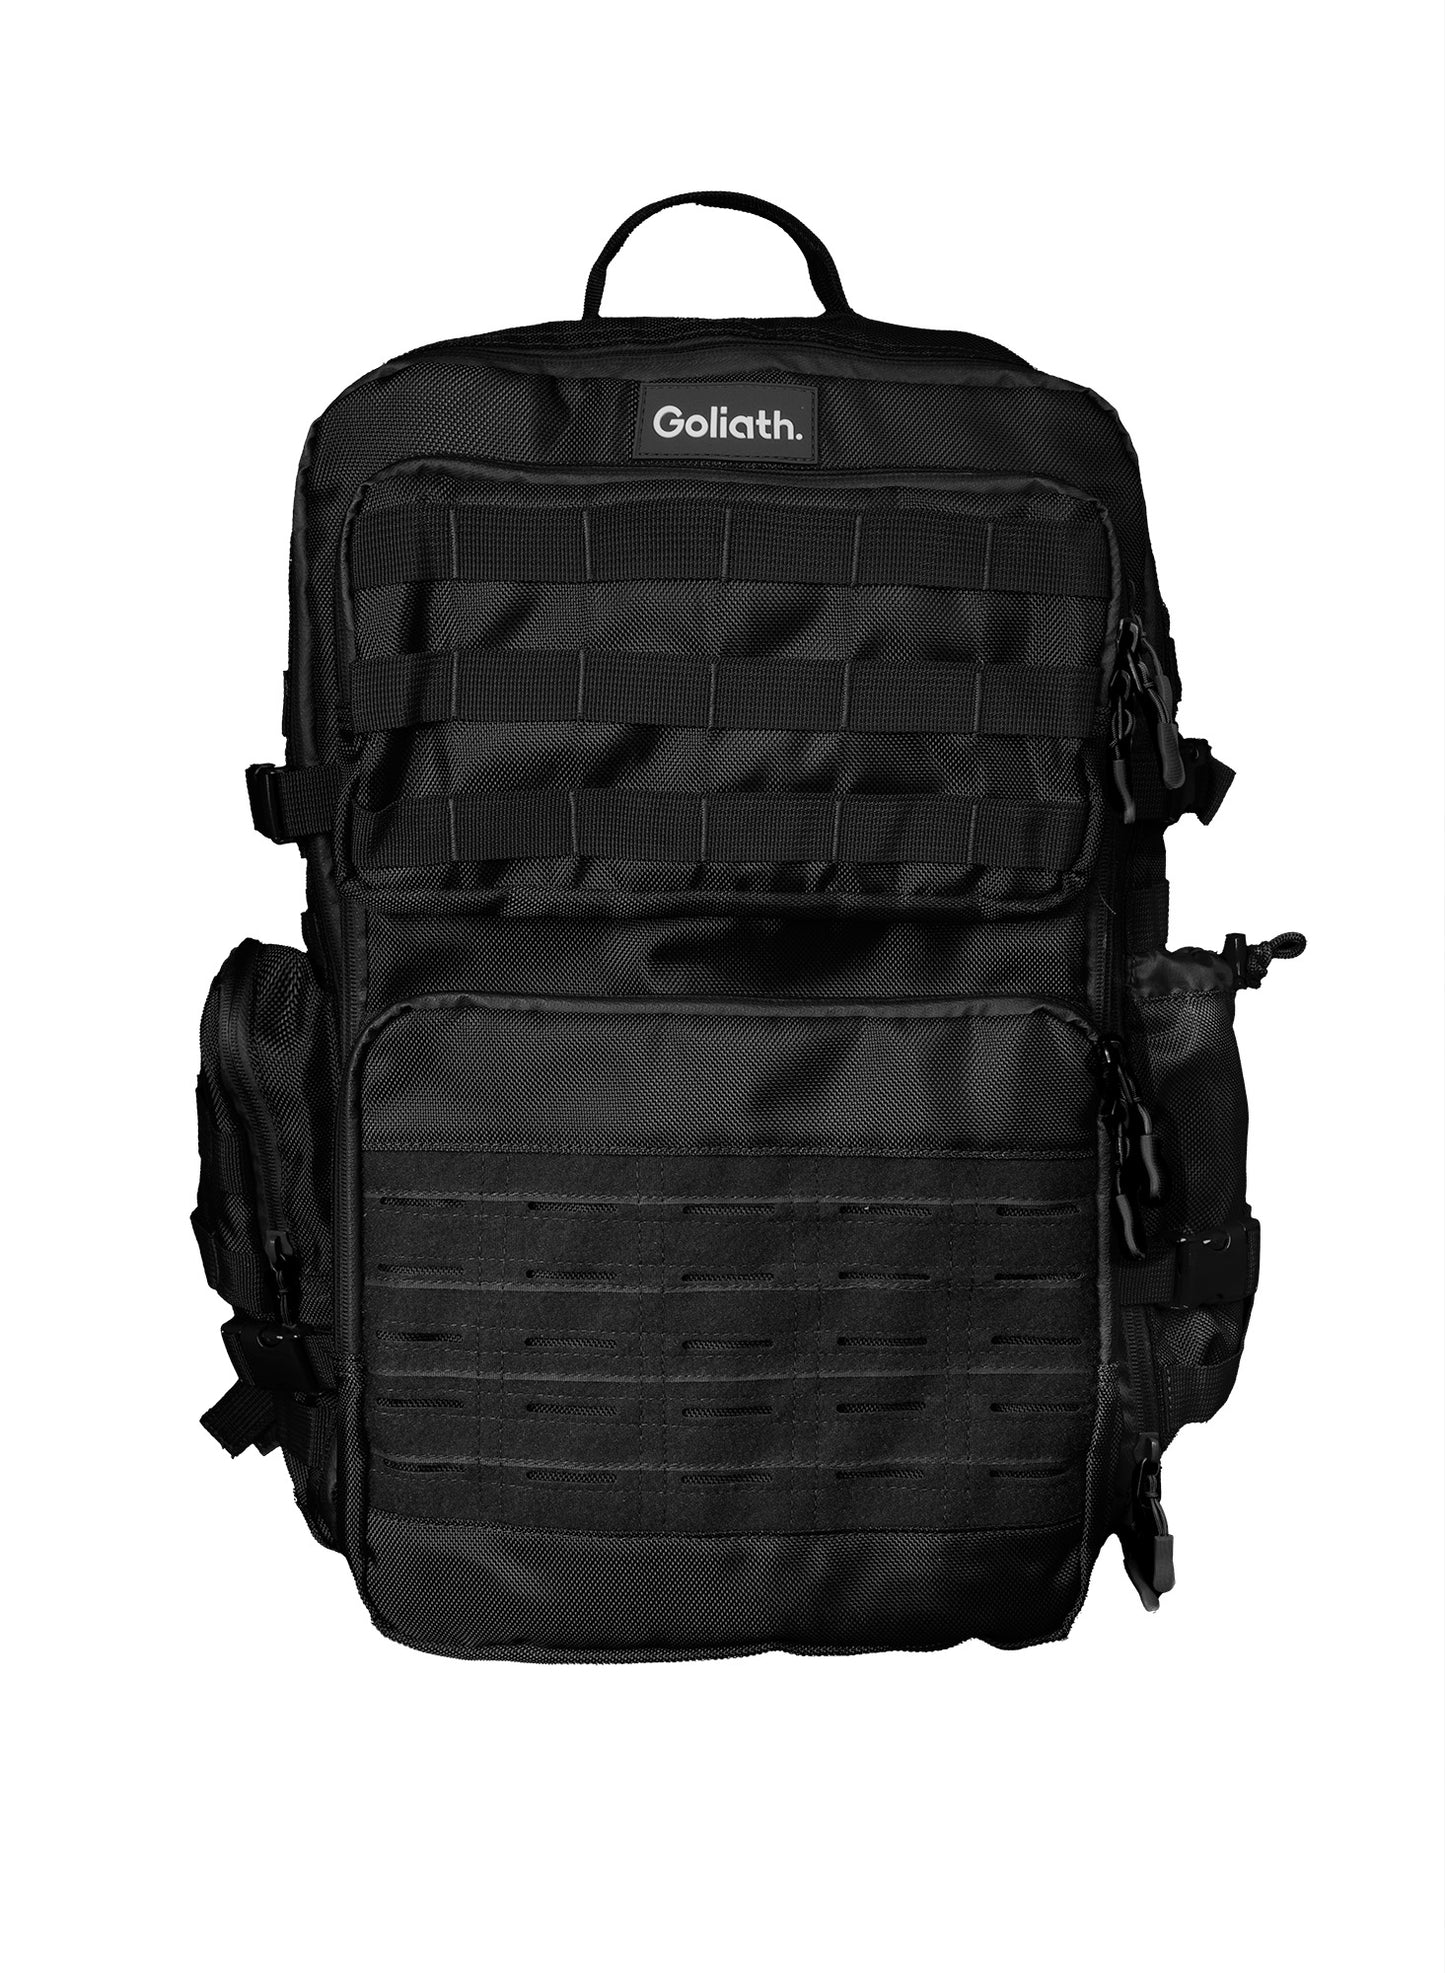 Black goliath backpack front view